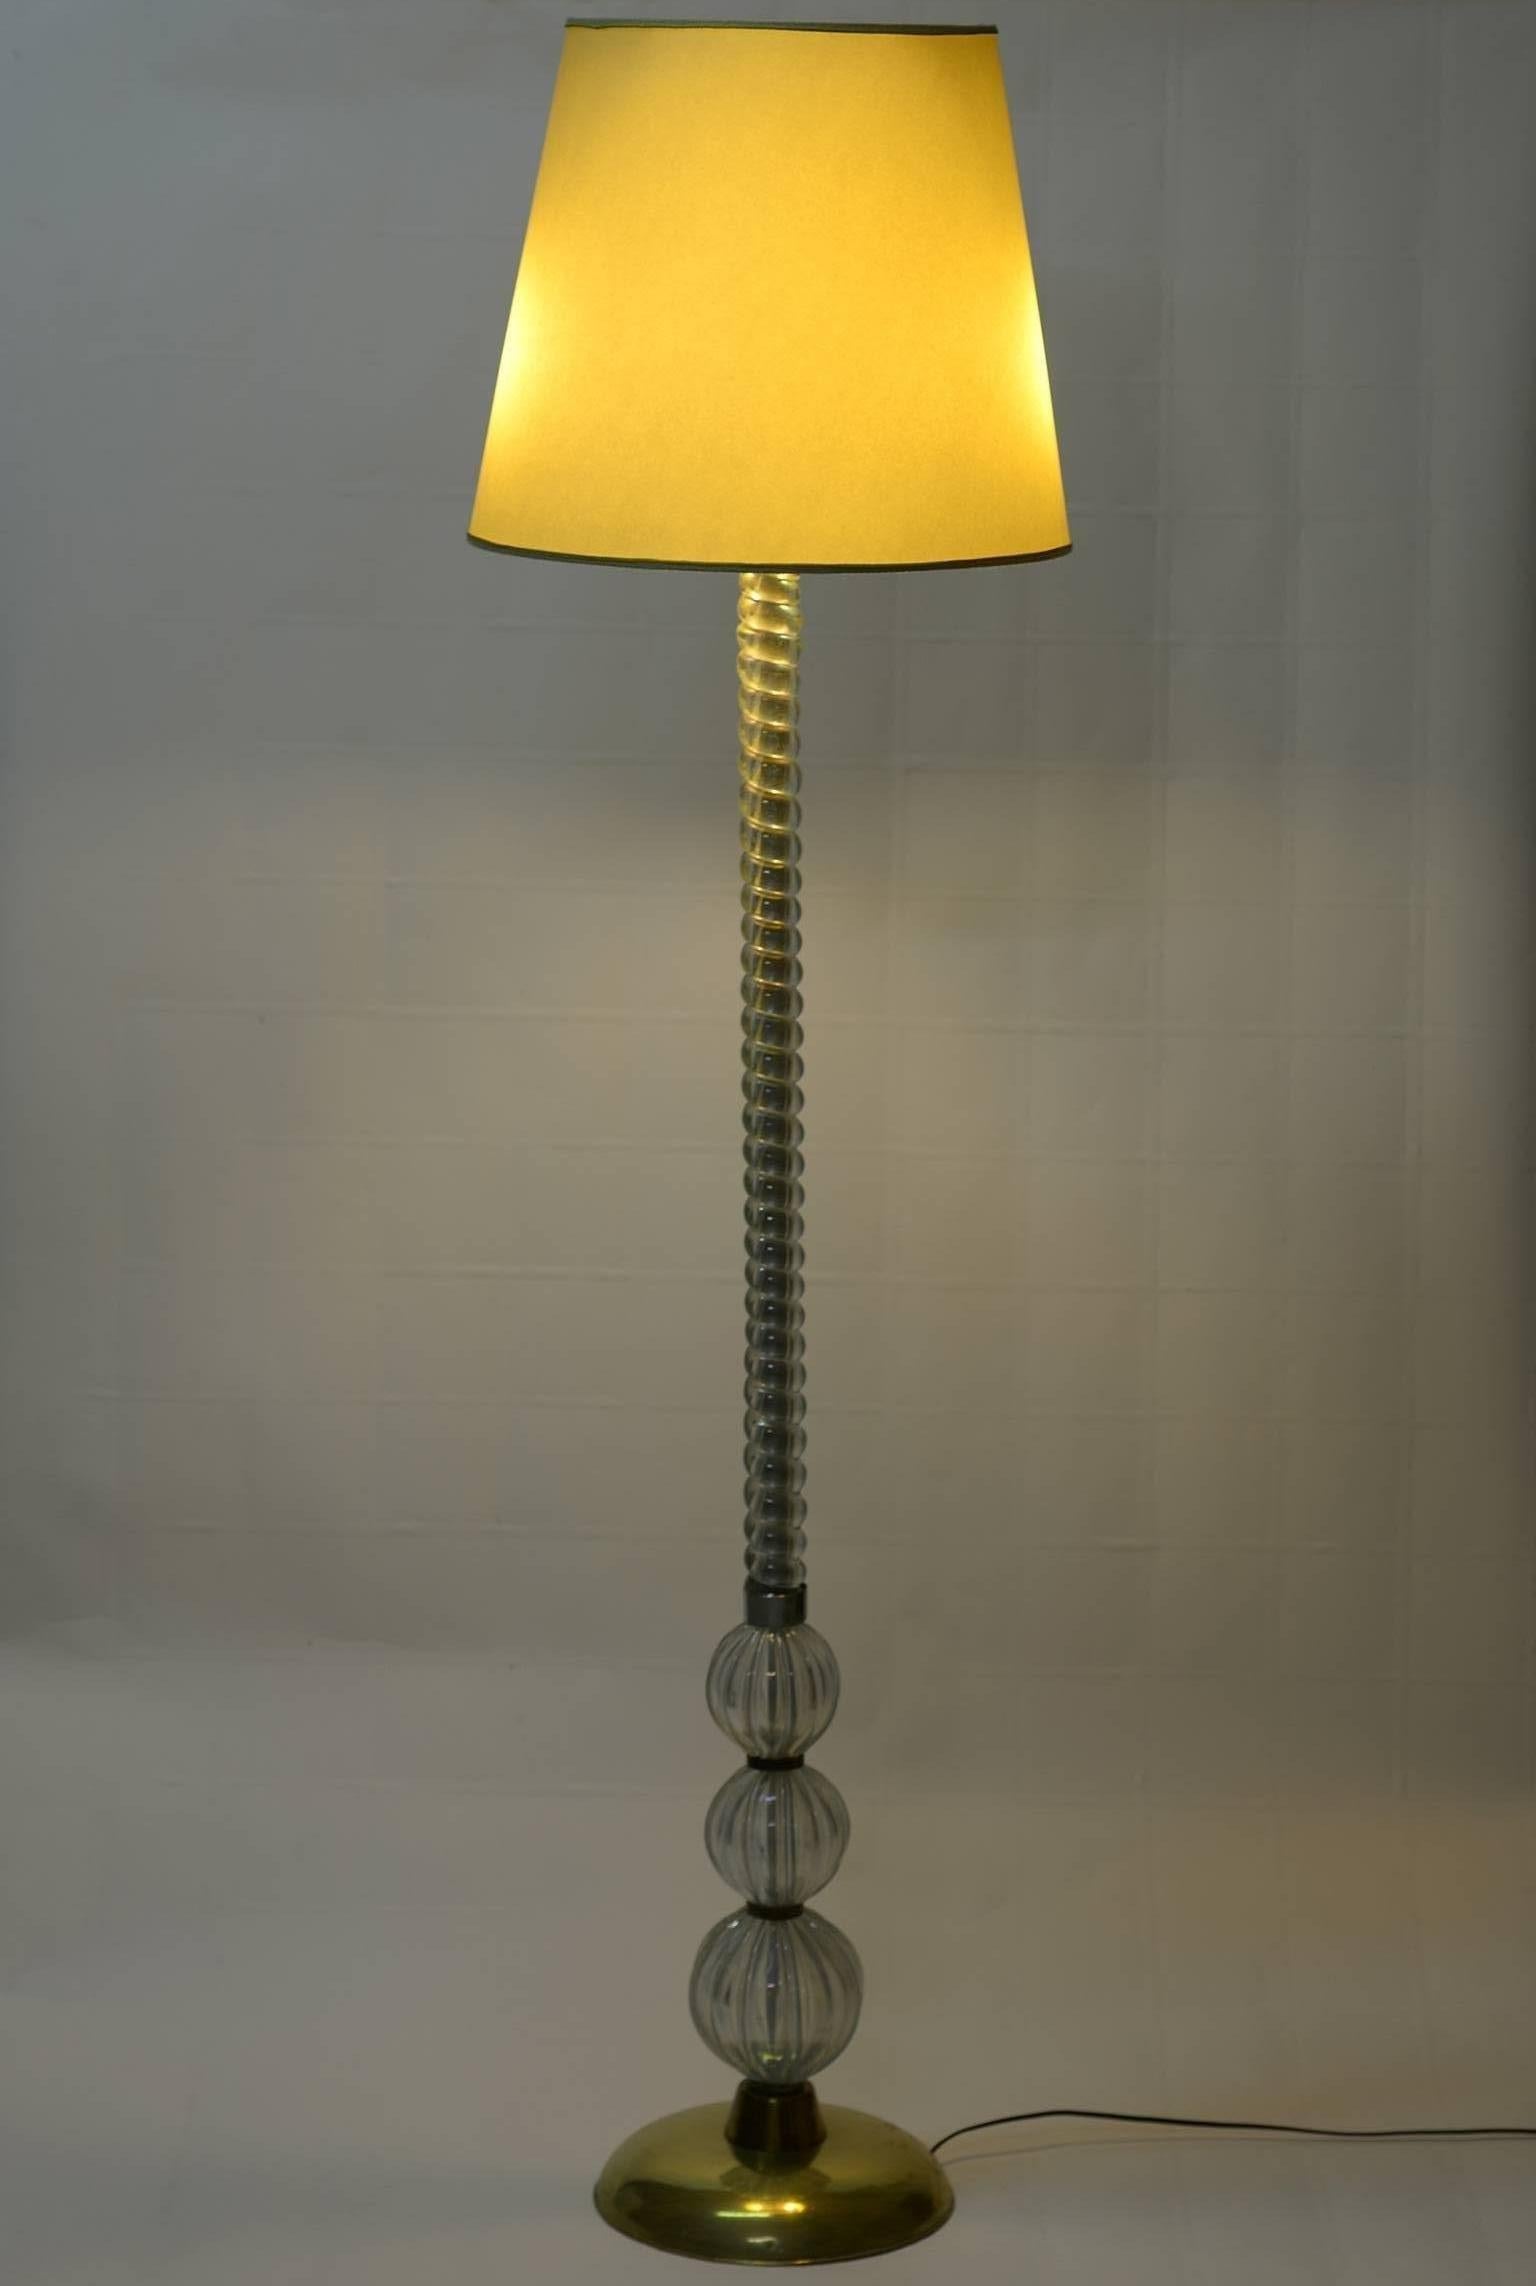 Iridescent blown Murano glass midcentury floor lamp by Barovier.
Brass details.
Murano Venice Italy, end of the 1930s.
Measures are with shade.